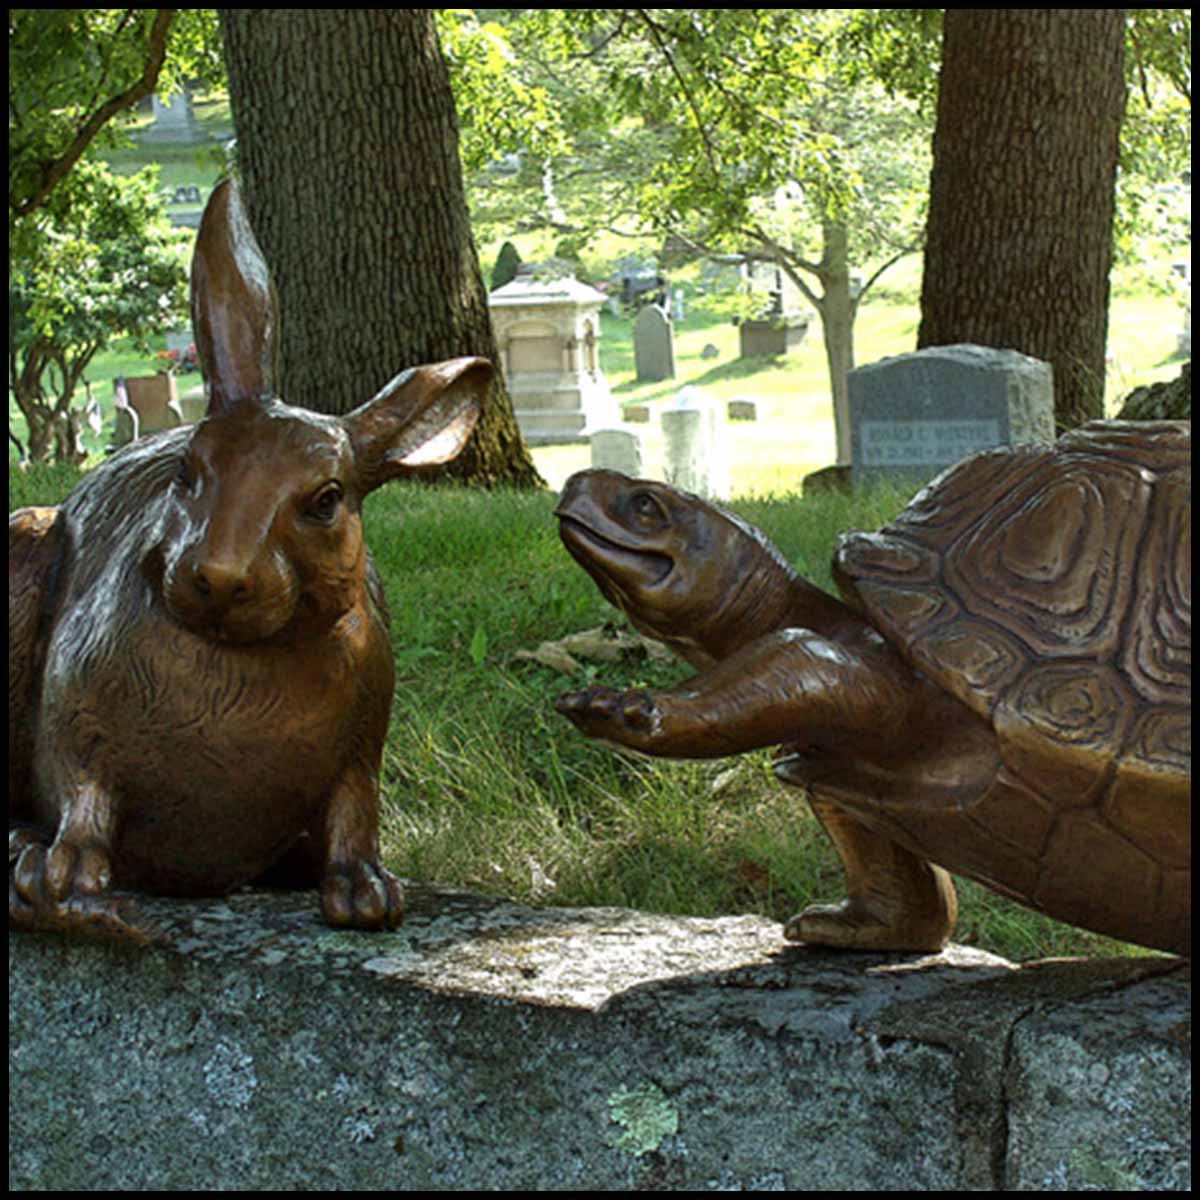 photo of bronze rabbit sculpture and bronze turtle sculpture sitting on a rock wall with grass and trees in the background